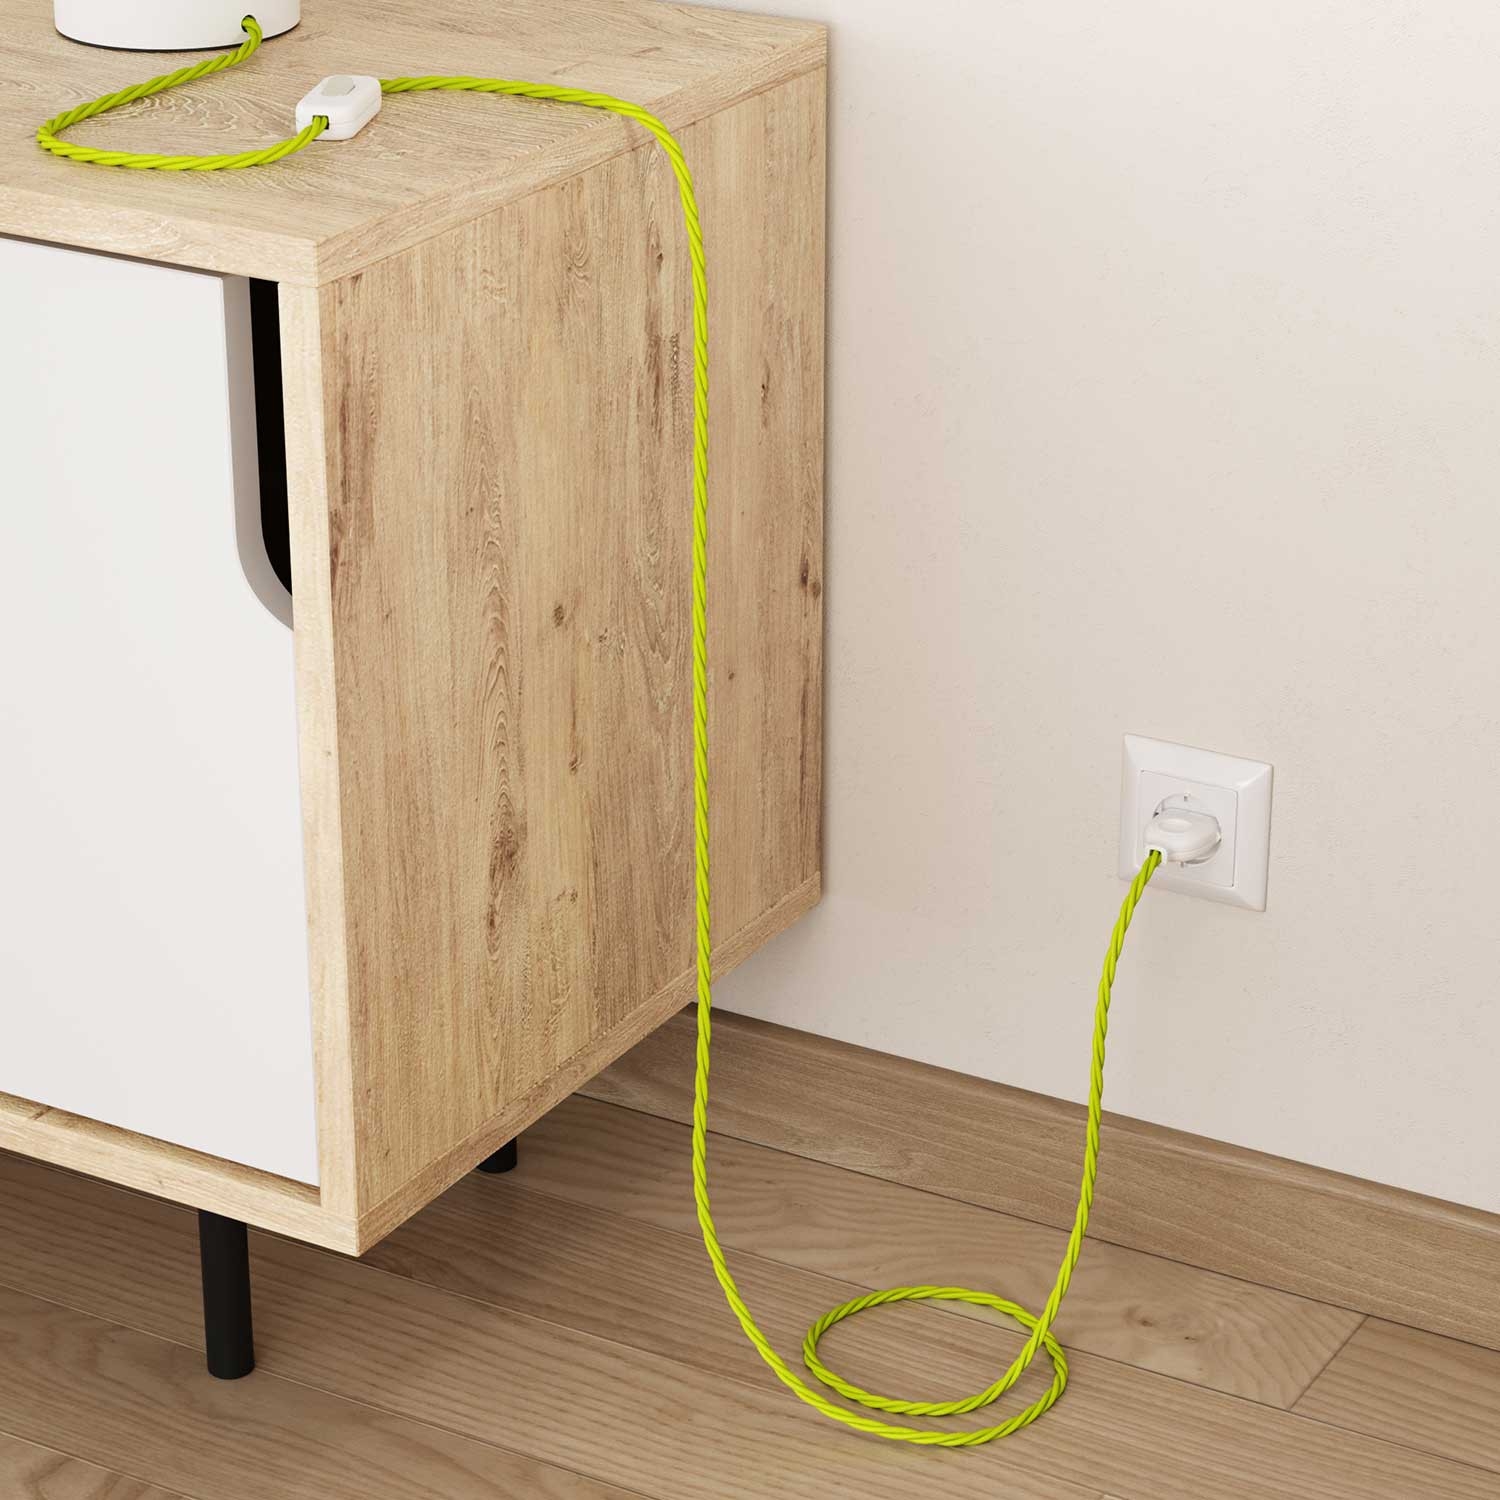 TF10 Neon Yellow Twisted Rayon Electrical Fabric Cloth Cord Cable